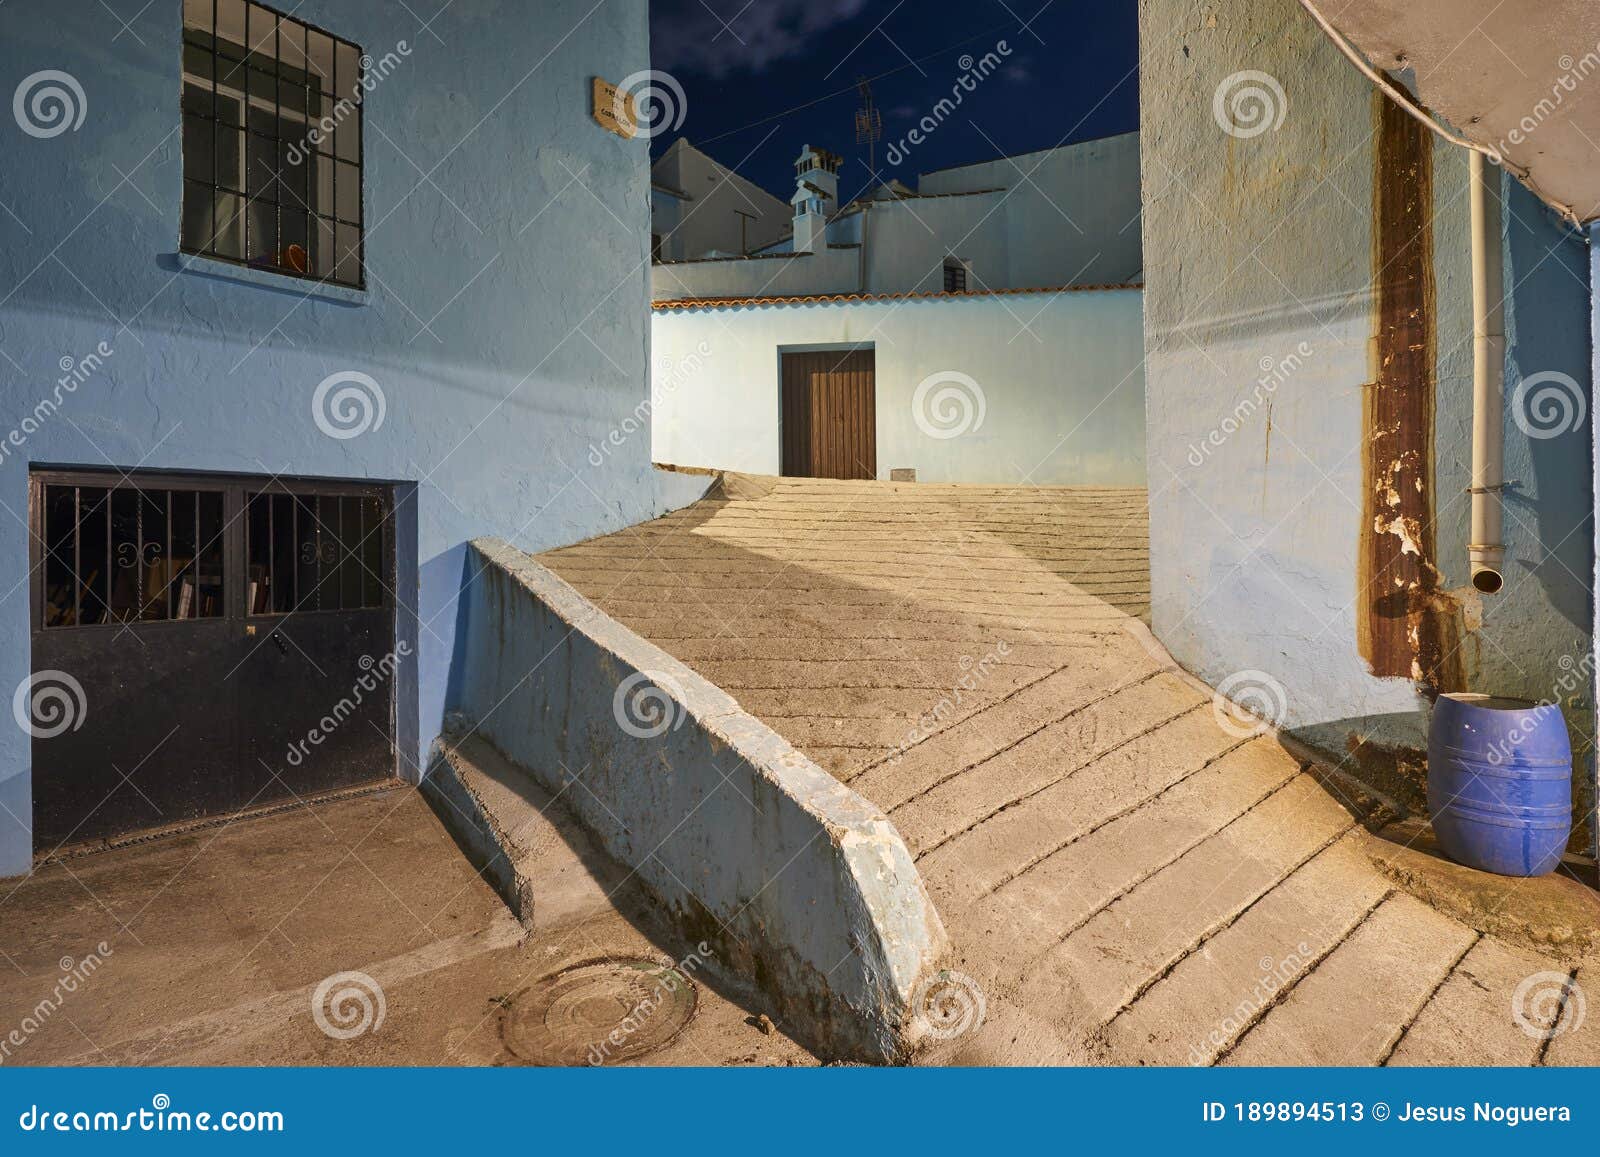 juzcar, spanish city of malaga. located in the genal valley in the serranÃÂ­a de ronda. the town was painted blue as the setting to